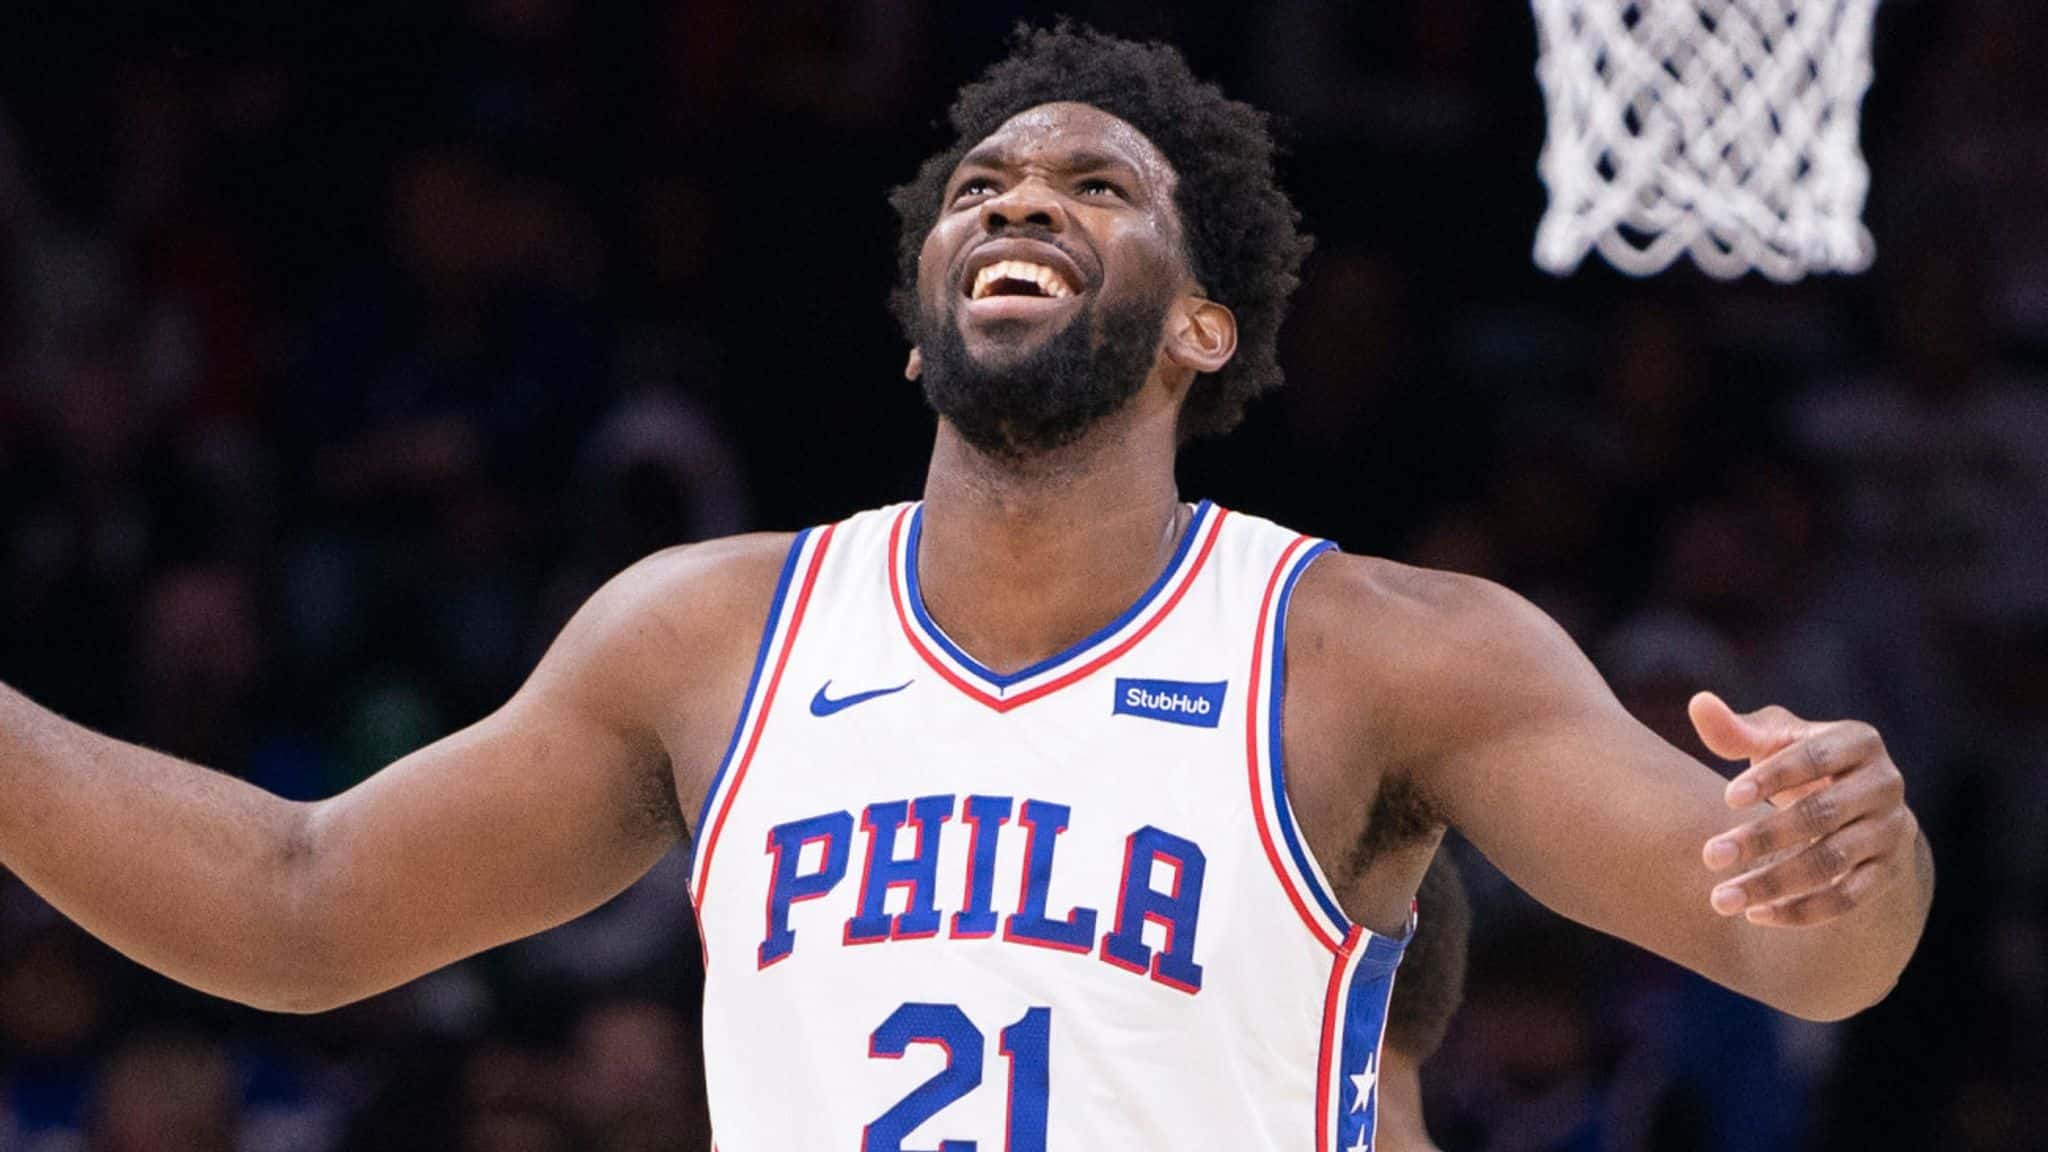 NBA Joel Embiid (25 points) et les Sixers toujours leaders Africa